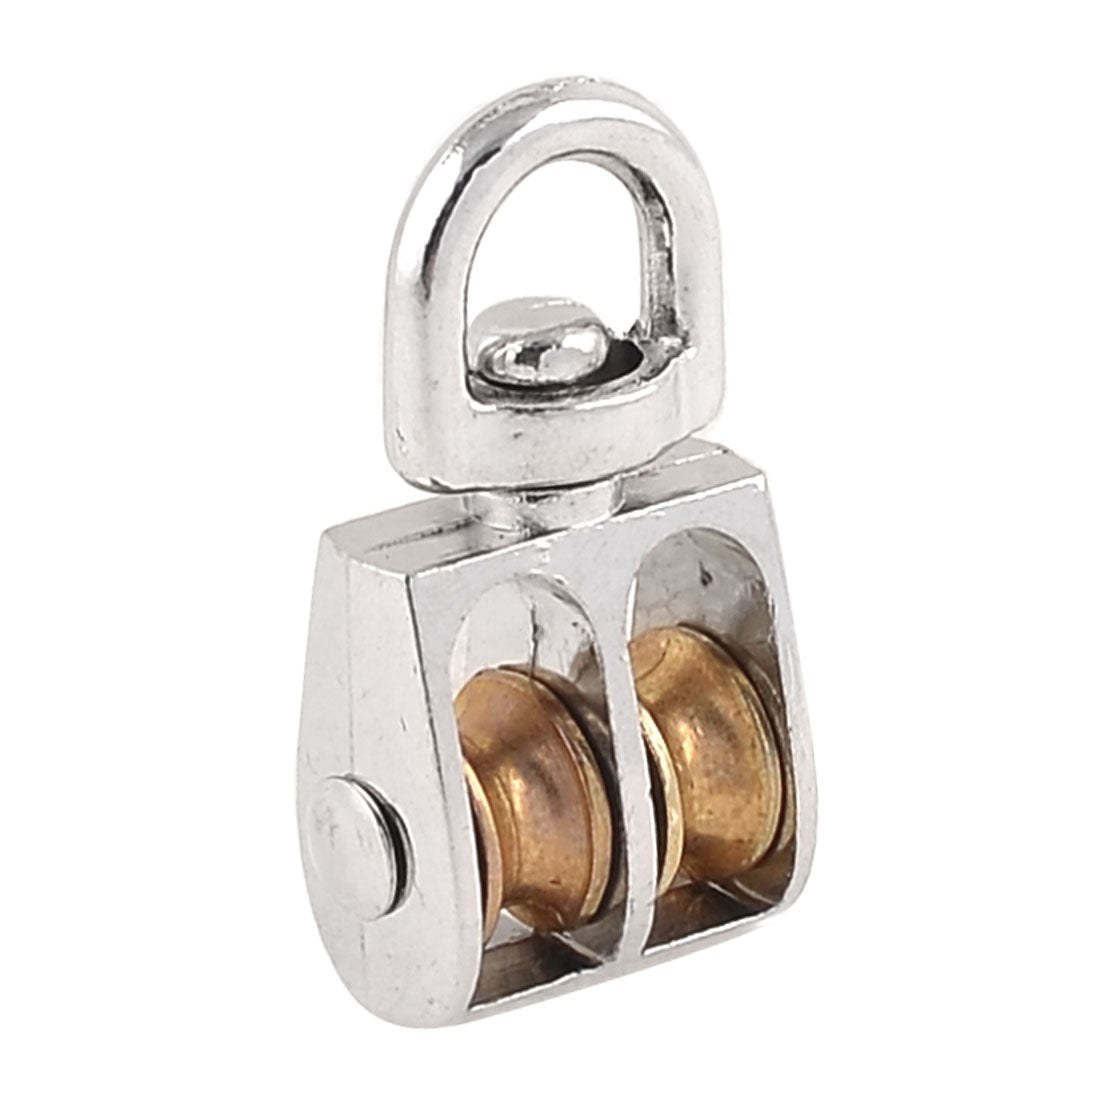 uxcell Uxcell Portable Gold Tone Double Wheel Hoist Wire Rope Pulley Block Tackle